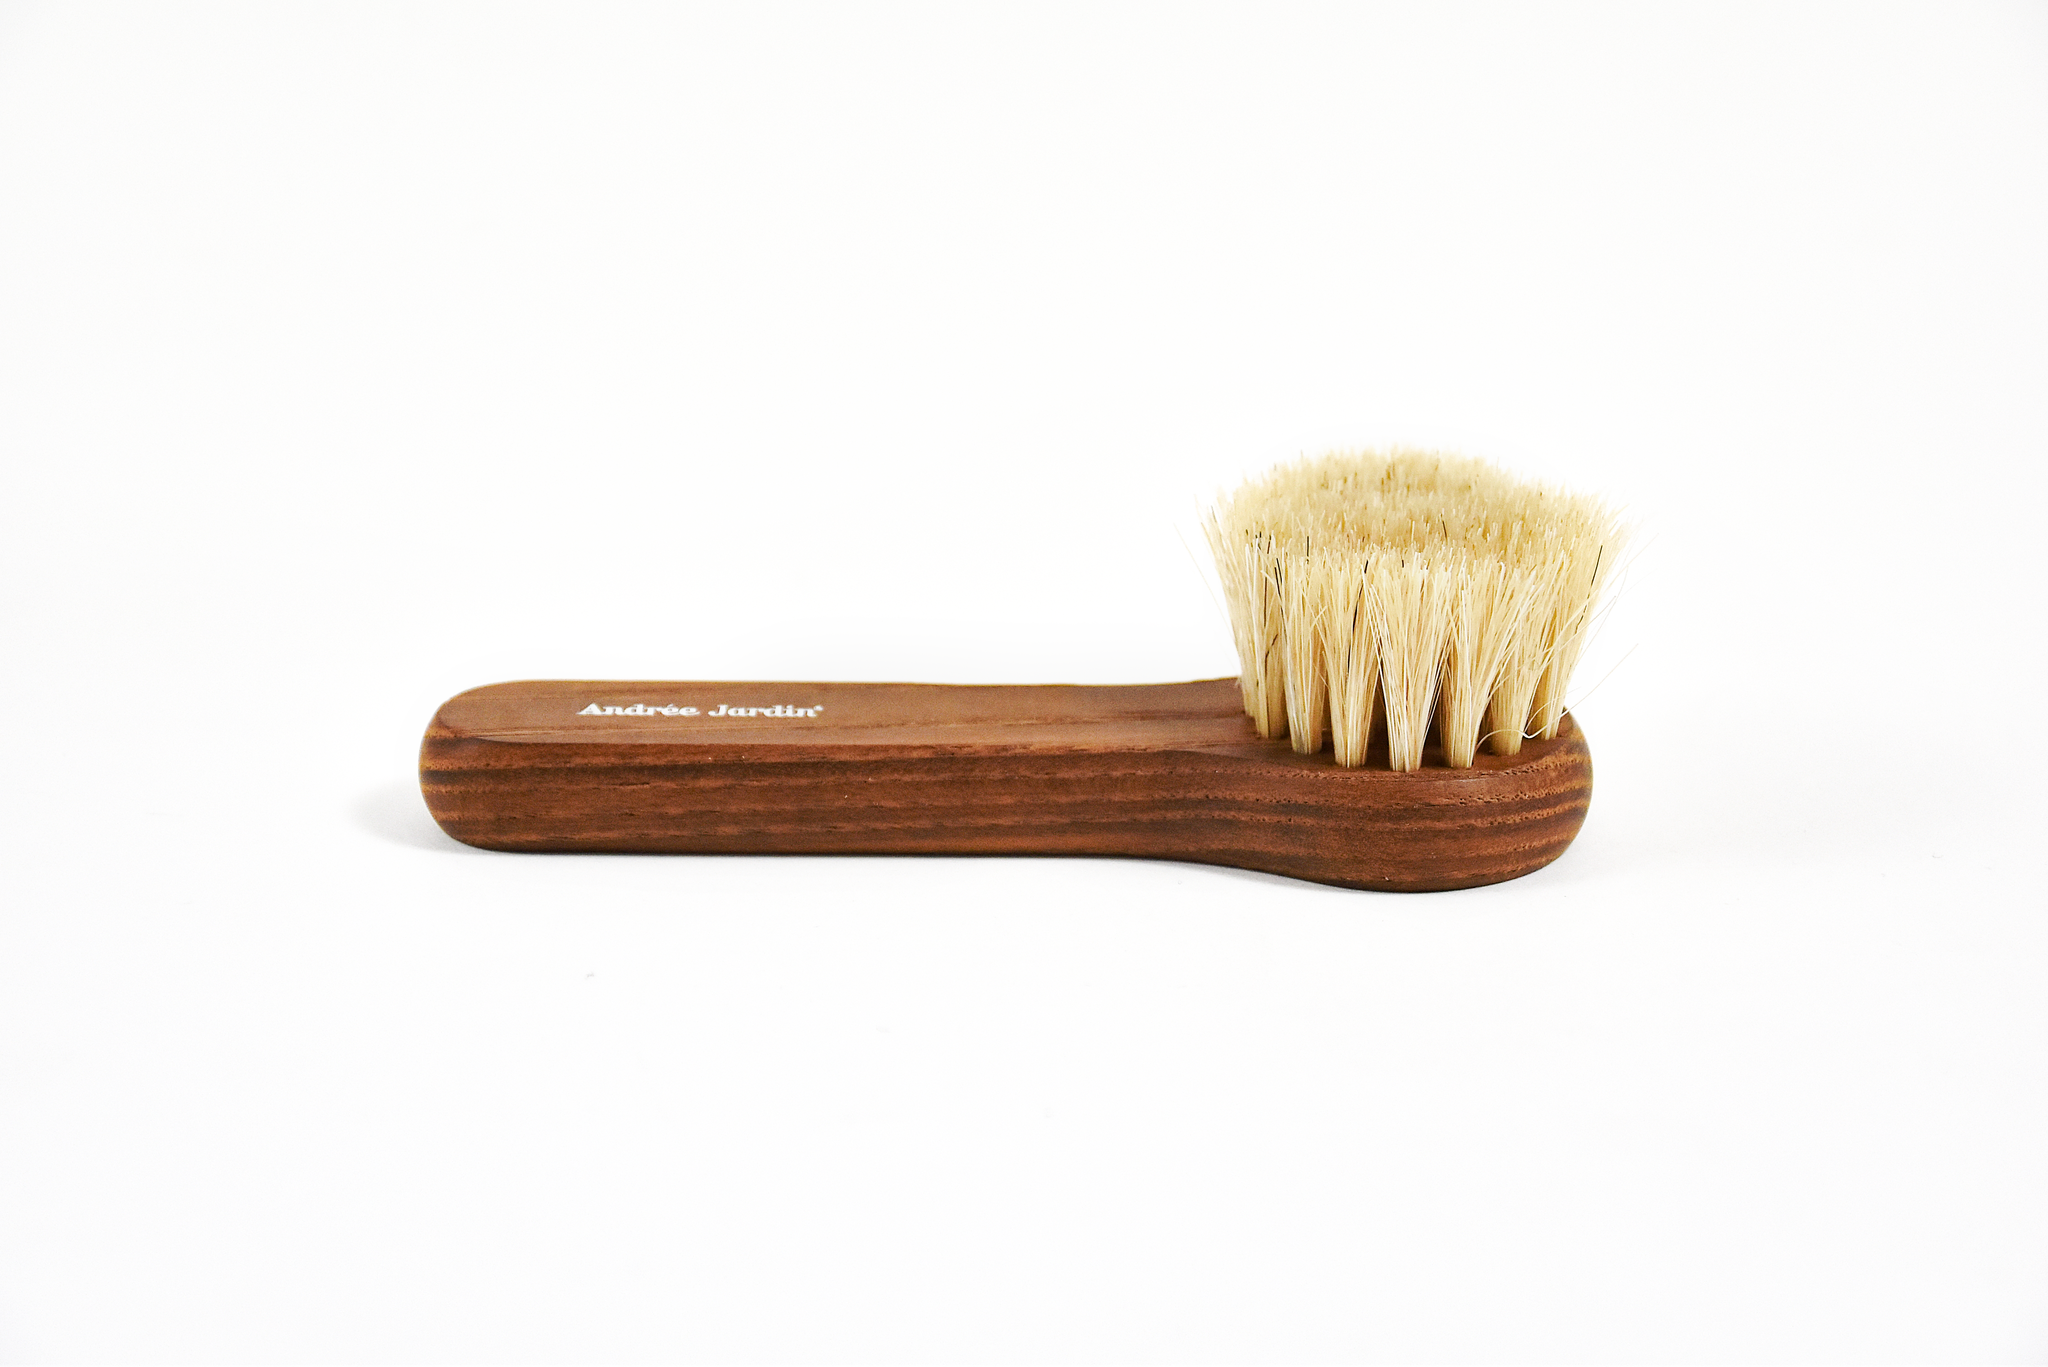 Andrée Jardin Face Brush Heat-Treated Ash Wood Andrée Jardin andree-jardin-face-brush-heat-treated-ash-wood - French Dry Goods